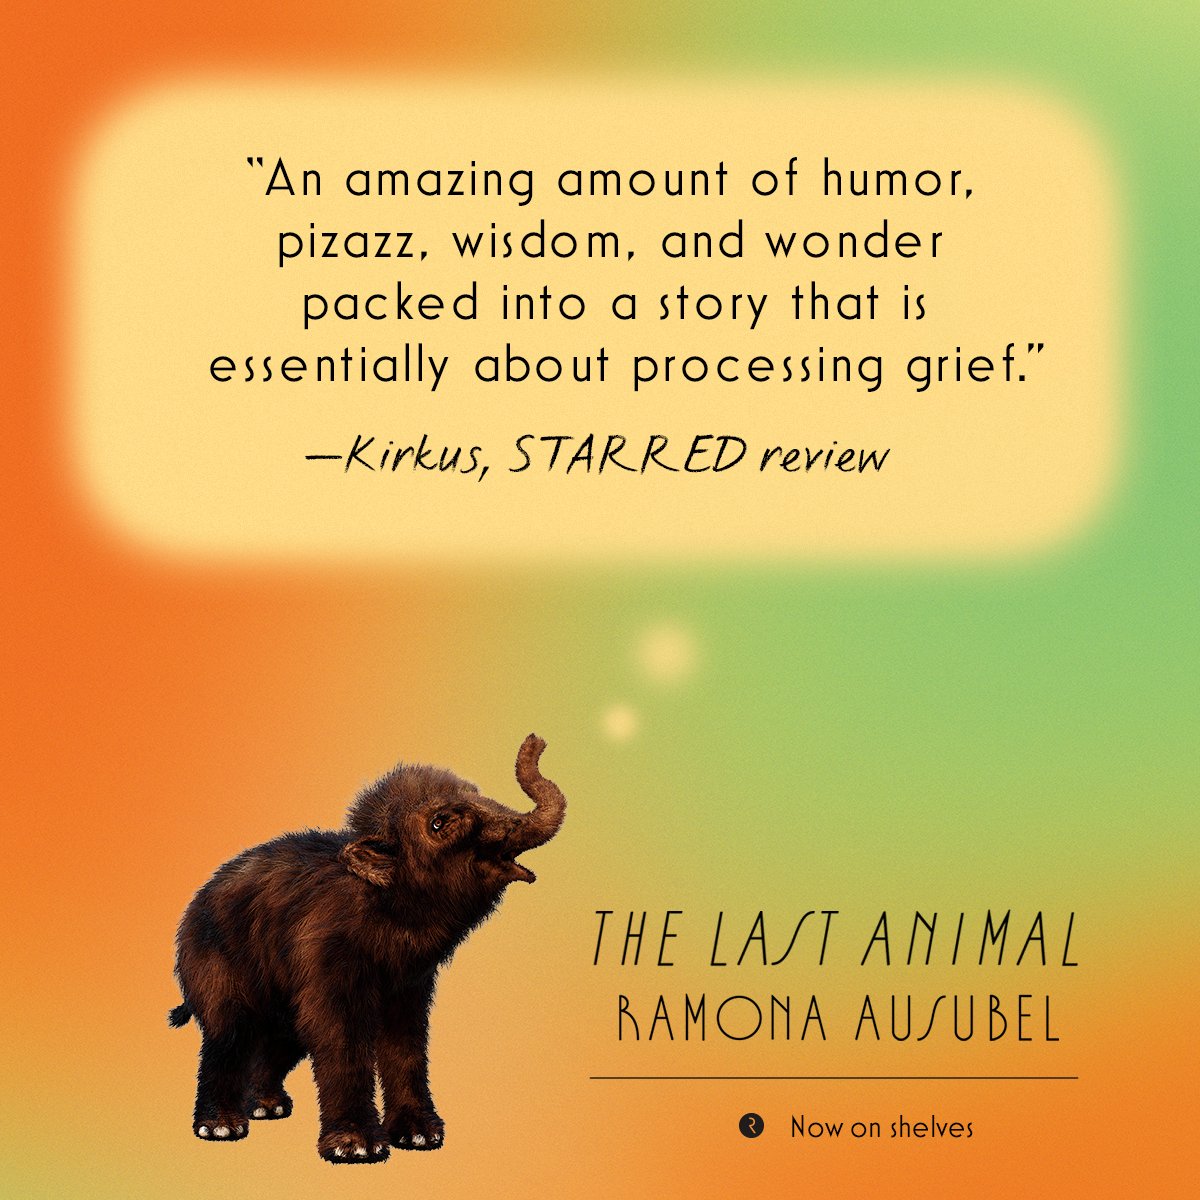 .@KirkusReviews says THE LAST ANIMAL is 'an extraordinary and slightly bananas 🍌 scientific adventure with a deeply felt portrait of a mother and daughters healing from terrible loss.'❤️ Have you read THE LAST ANIMAL (@ramona_ausubel) yet? bit.ly/3yWTuBo